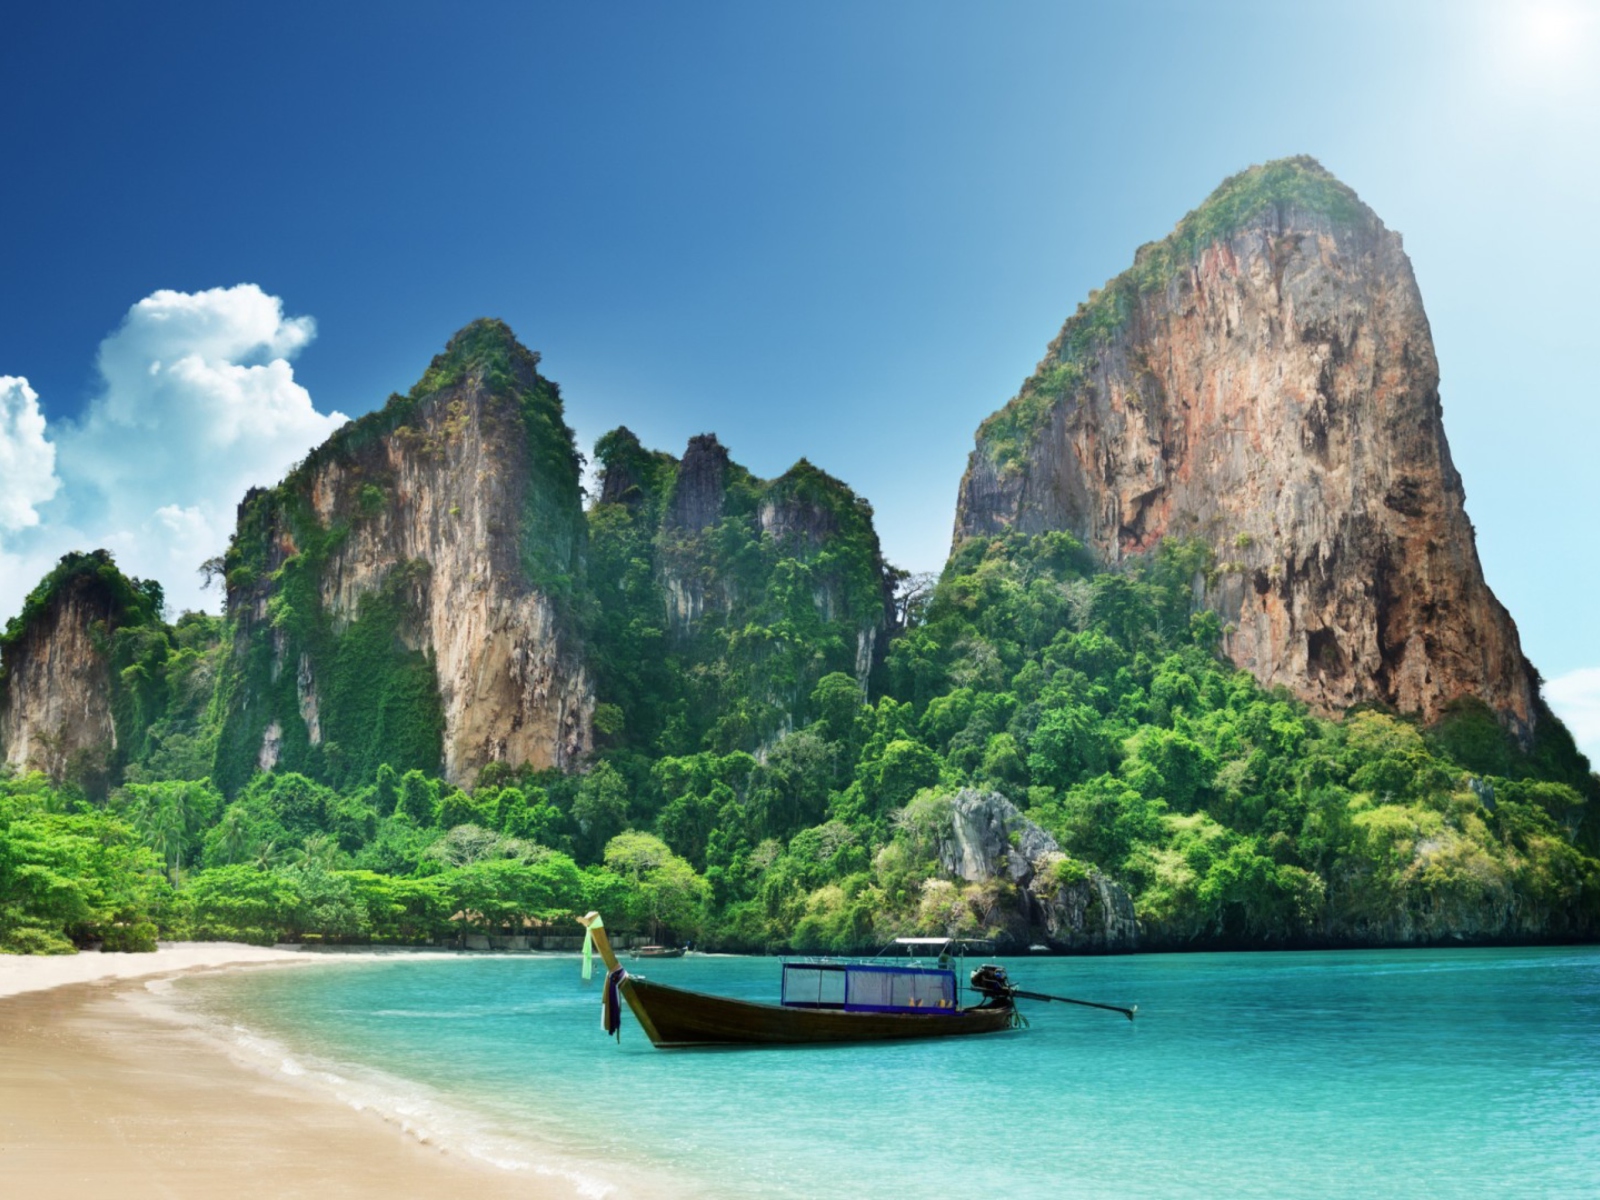 Das Boat And Rocks In Thailand Wallpaper 1600x1200